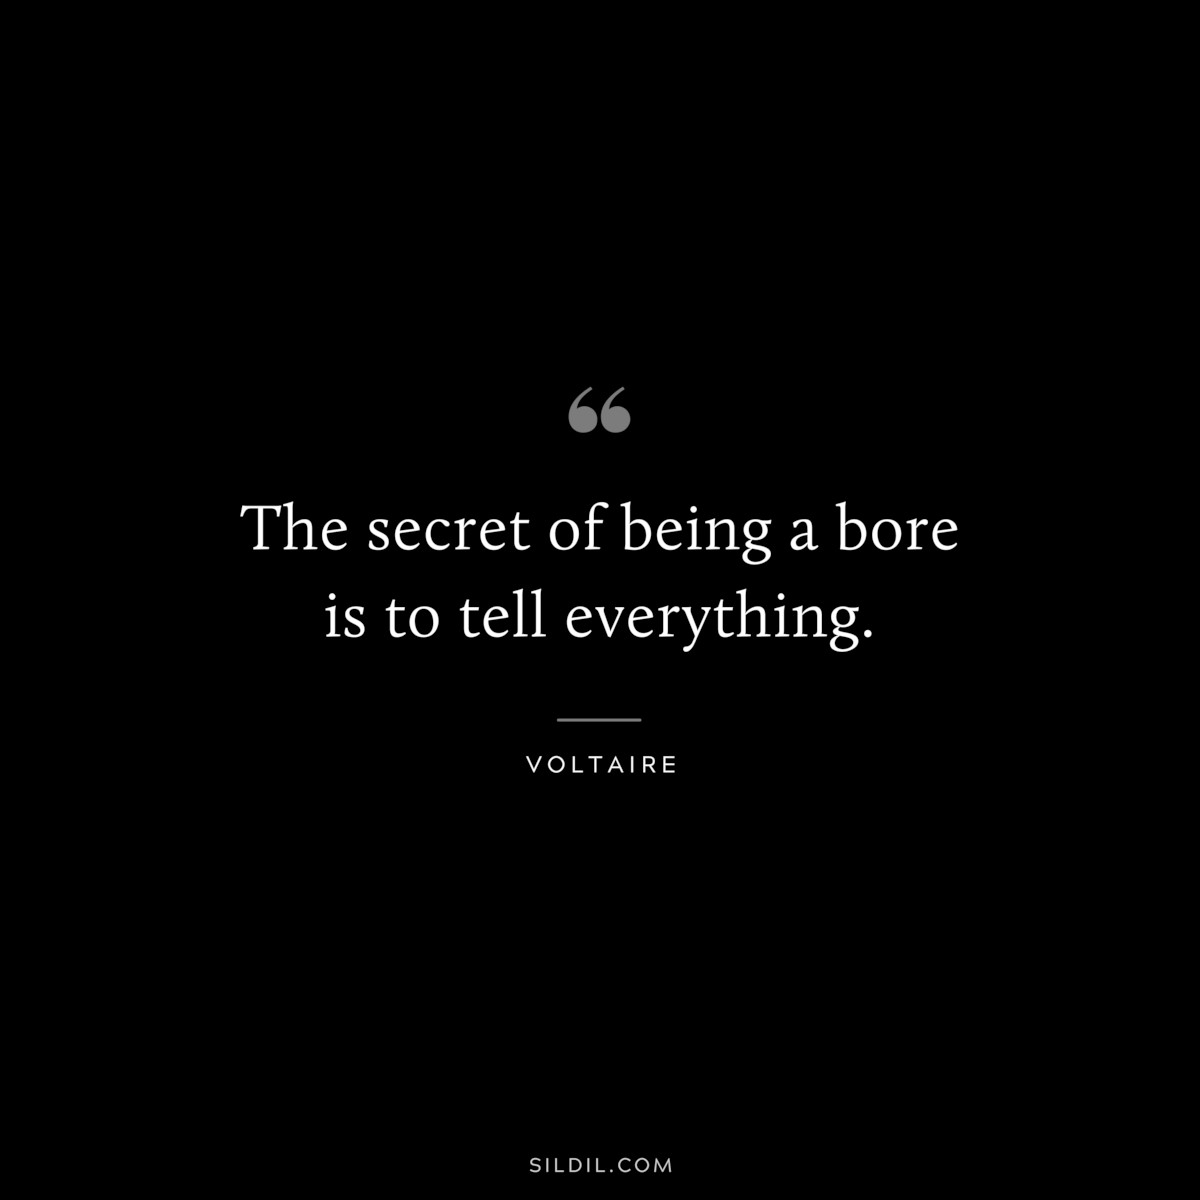 The secret of being a bore is to tell everything. ― Voltaire